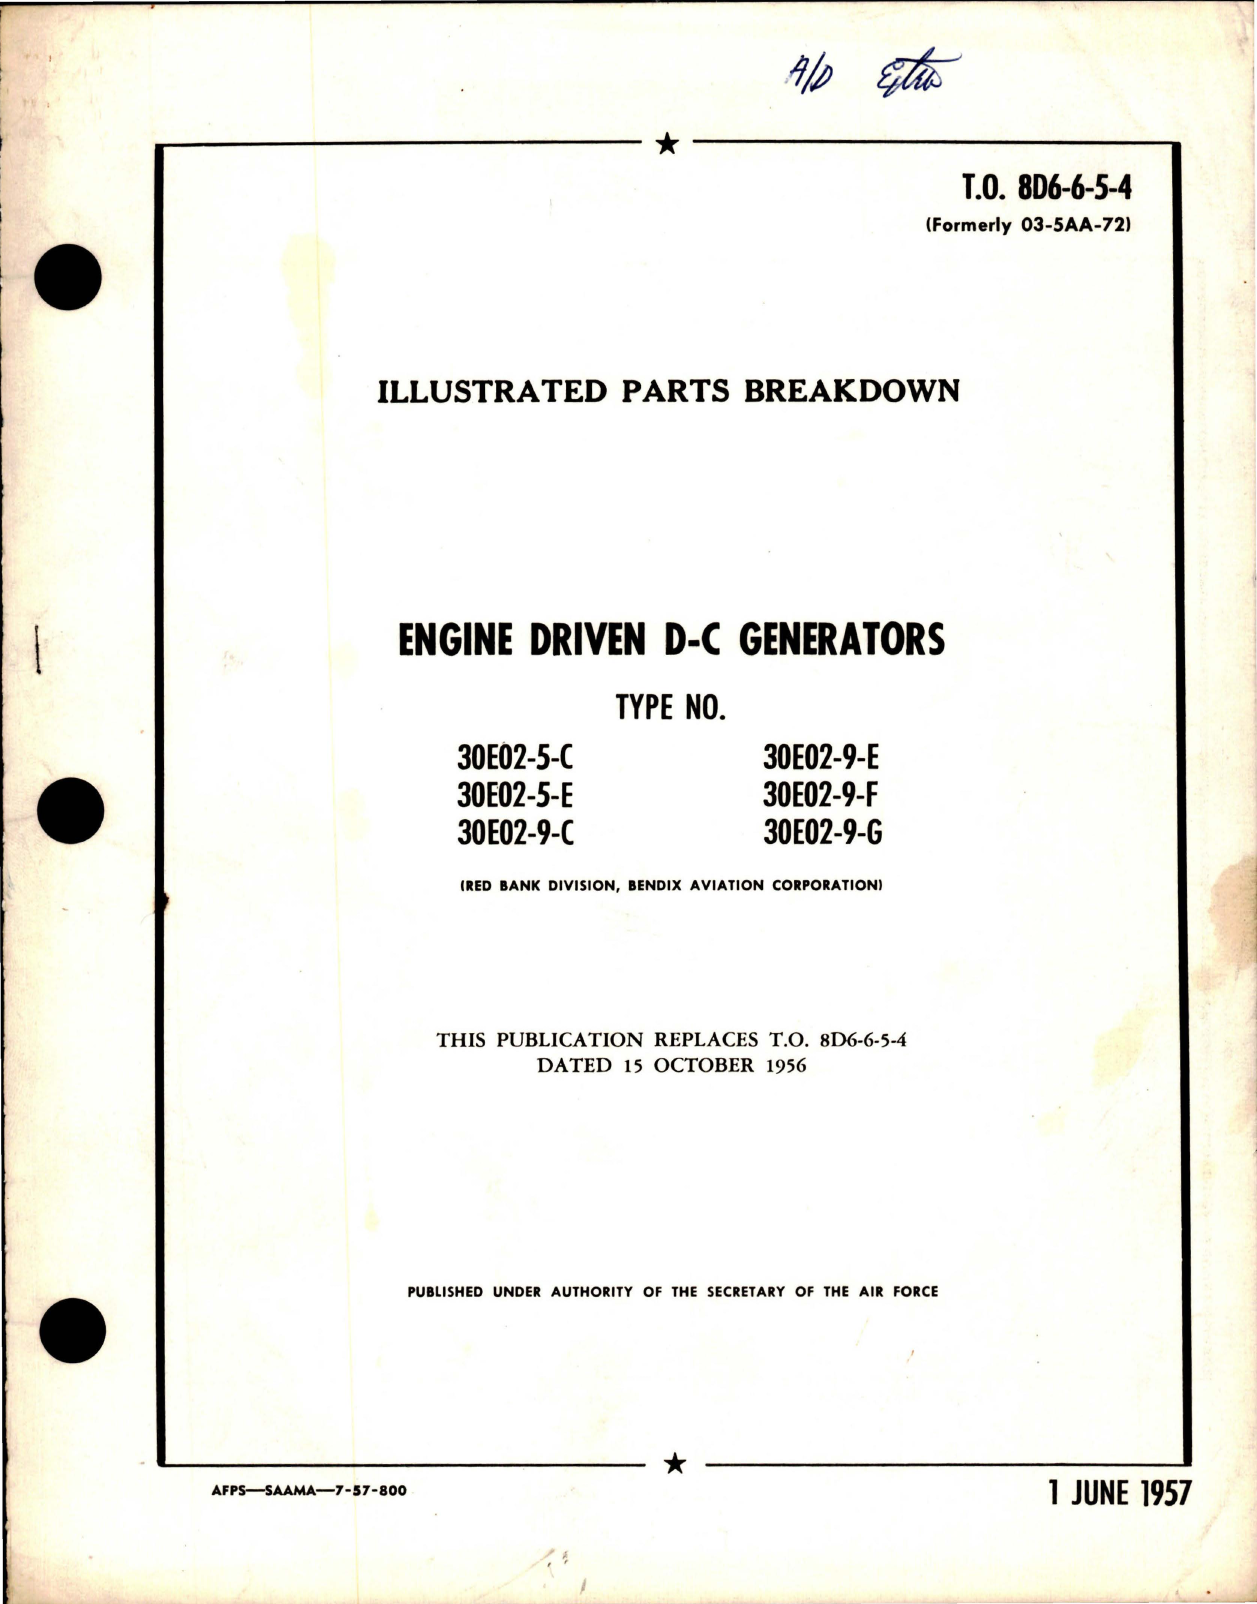 Sample page 1 from AirCorps Library document: Illustrated Parts Breakdown for Engine Driven D-C Generators